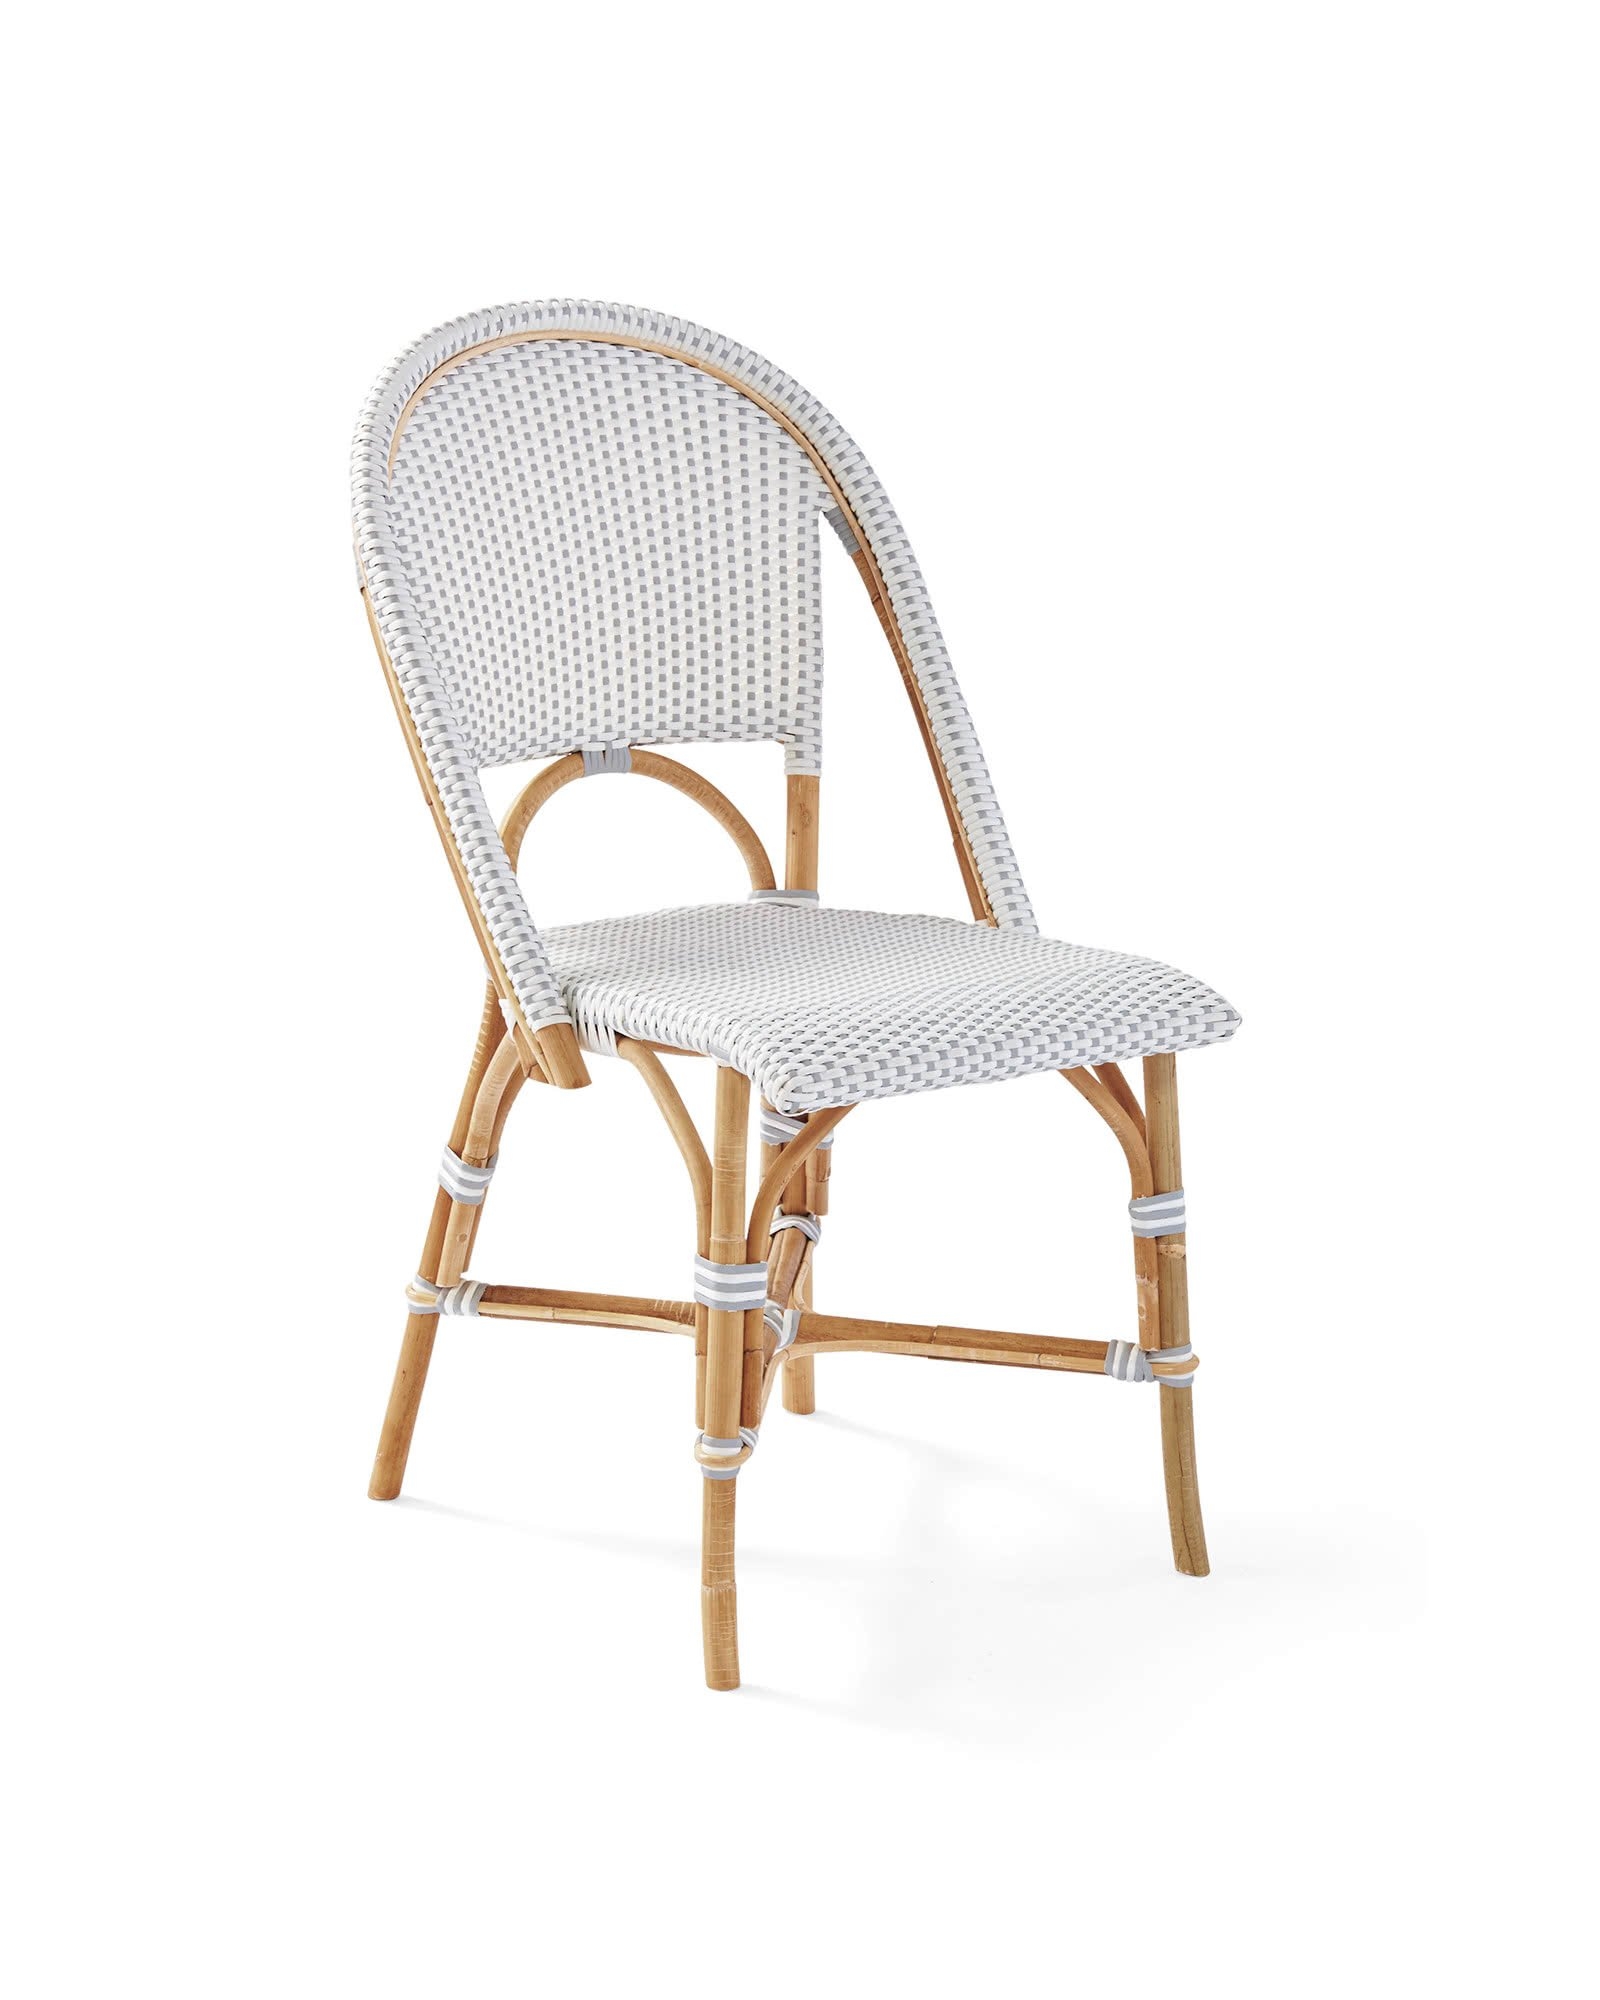 Sunwashed Riviera Rattan Dining Chair - Mist - Image 0